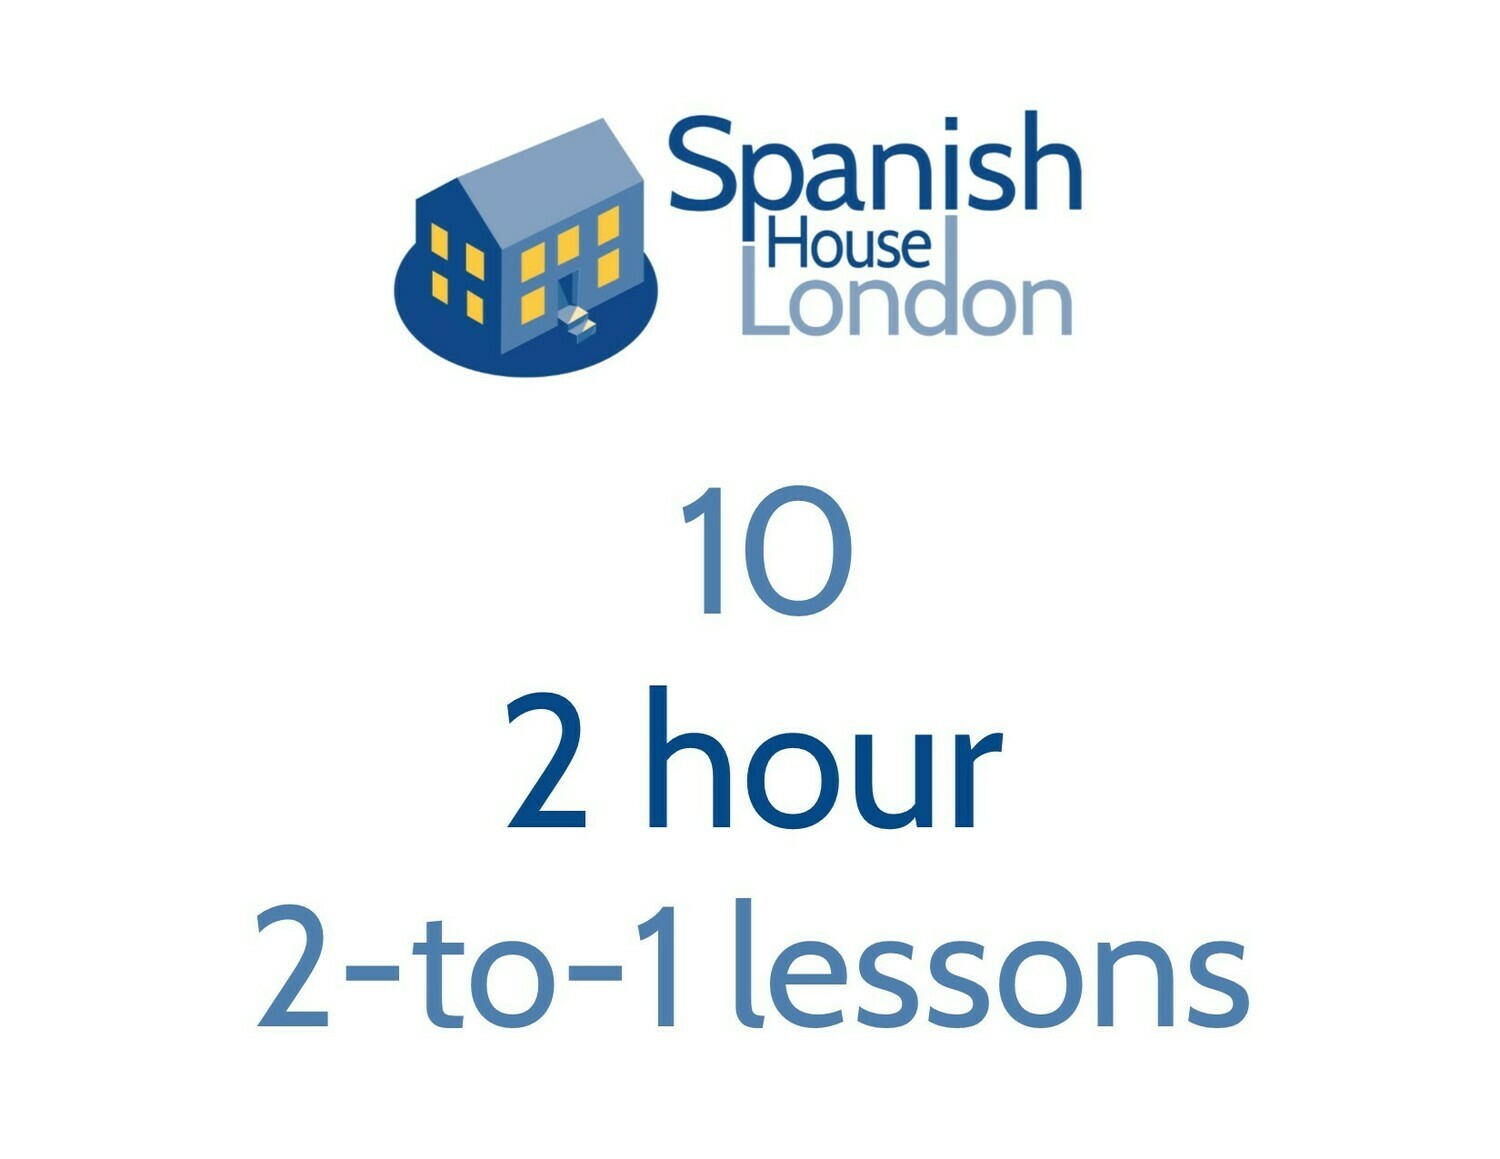 Ten 2-hour 2-to-1 lessons